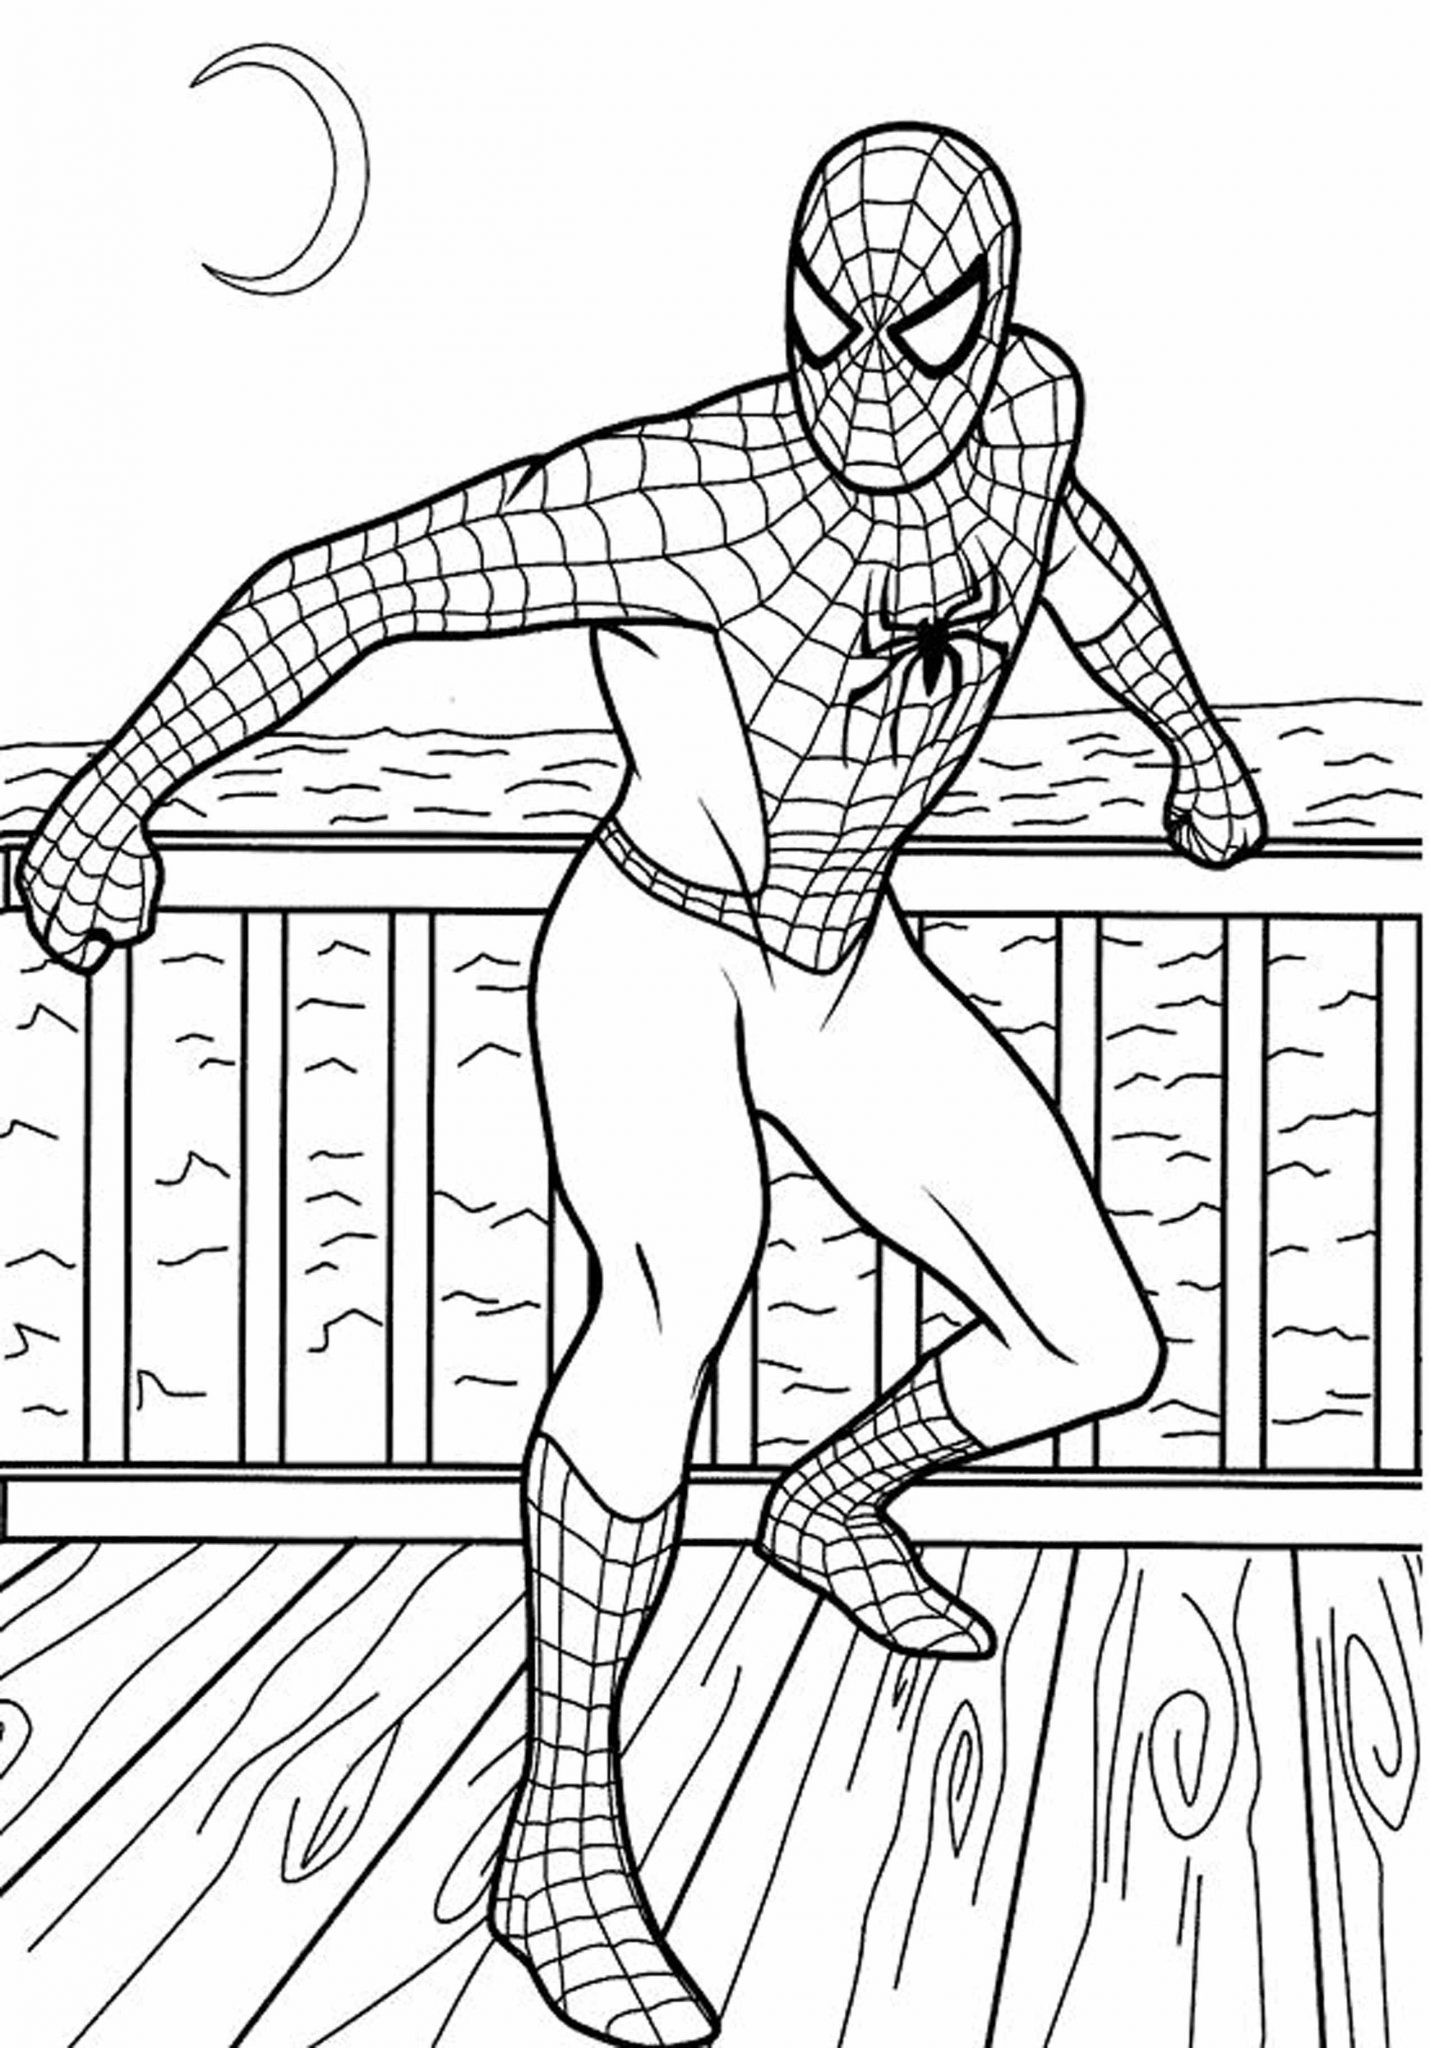 coloring-pages-for-boys-training-shopping-for-children